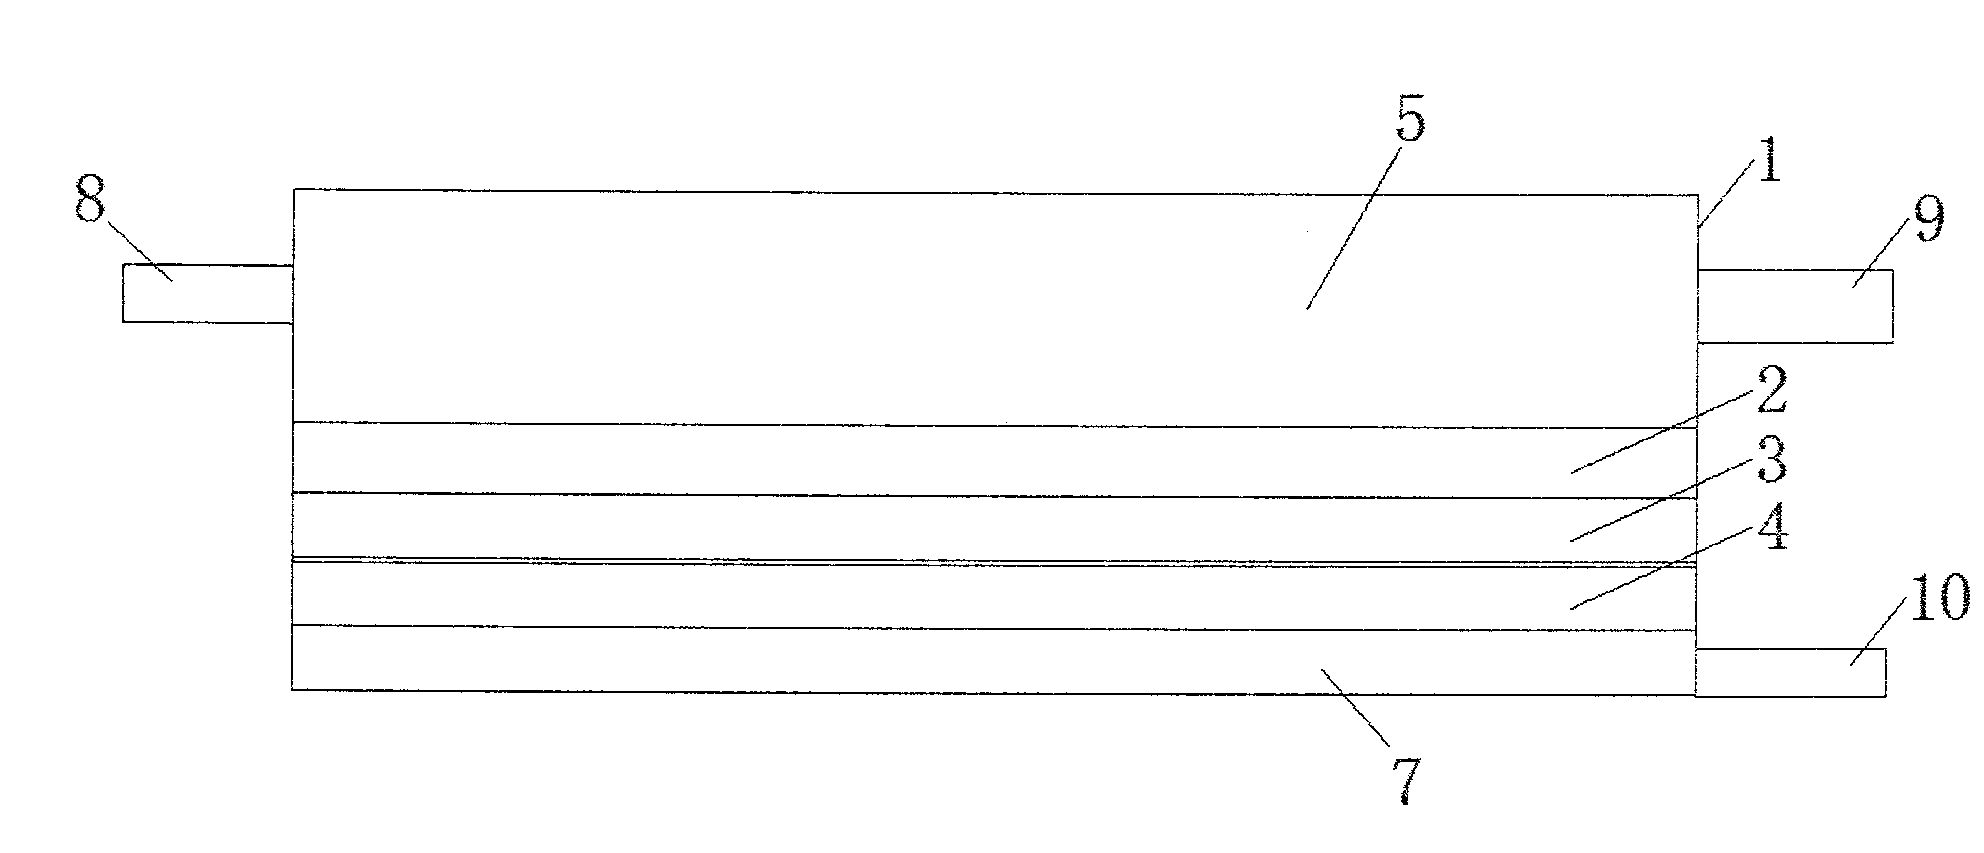 Wall-attachment cell culture method